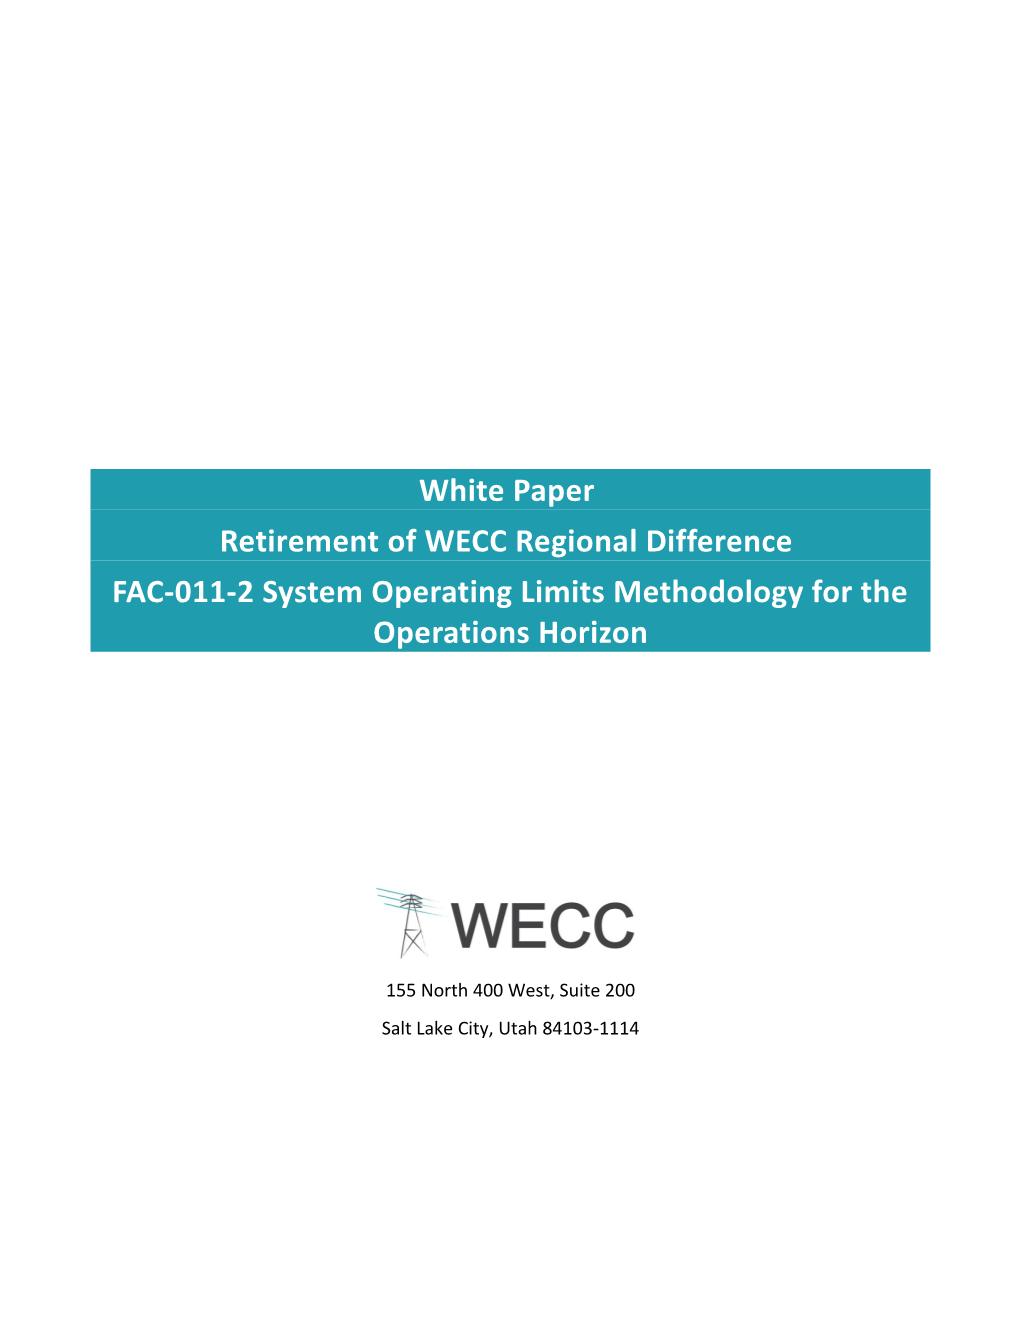 WECC-0113 Posting 2 FAC-011-2 SOL Method for the Ops Horizon - White Paper to Retire